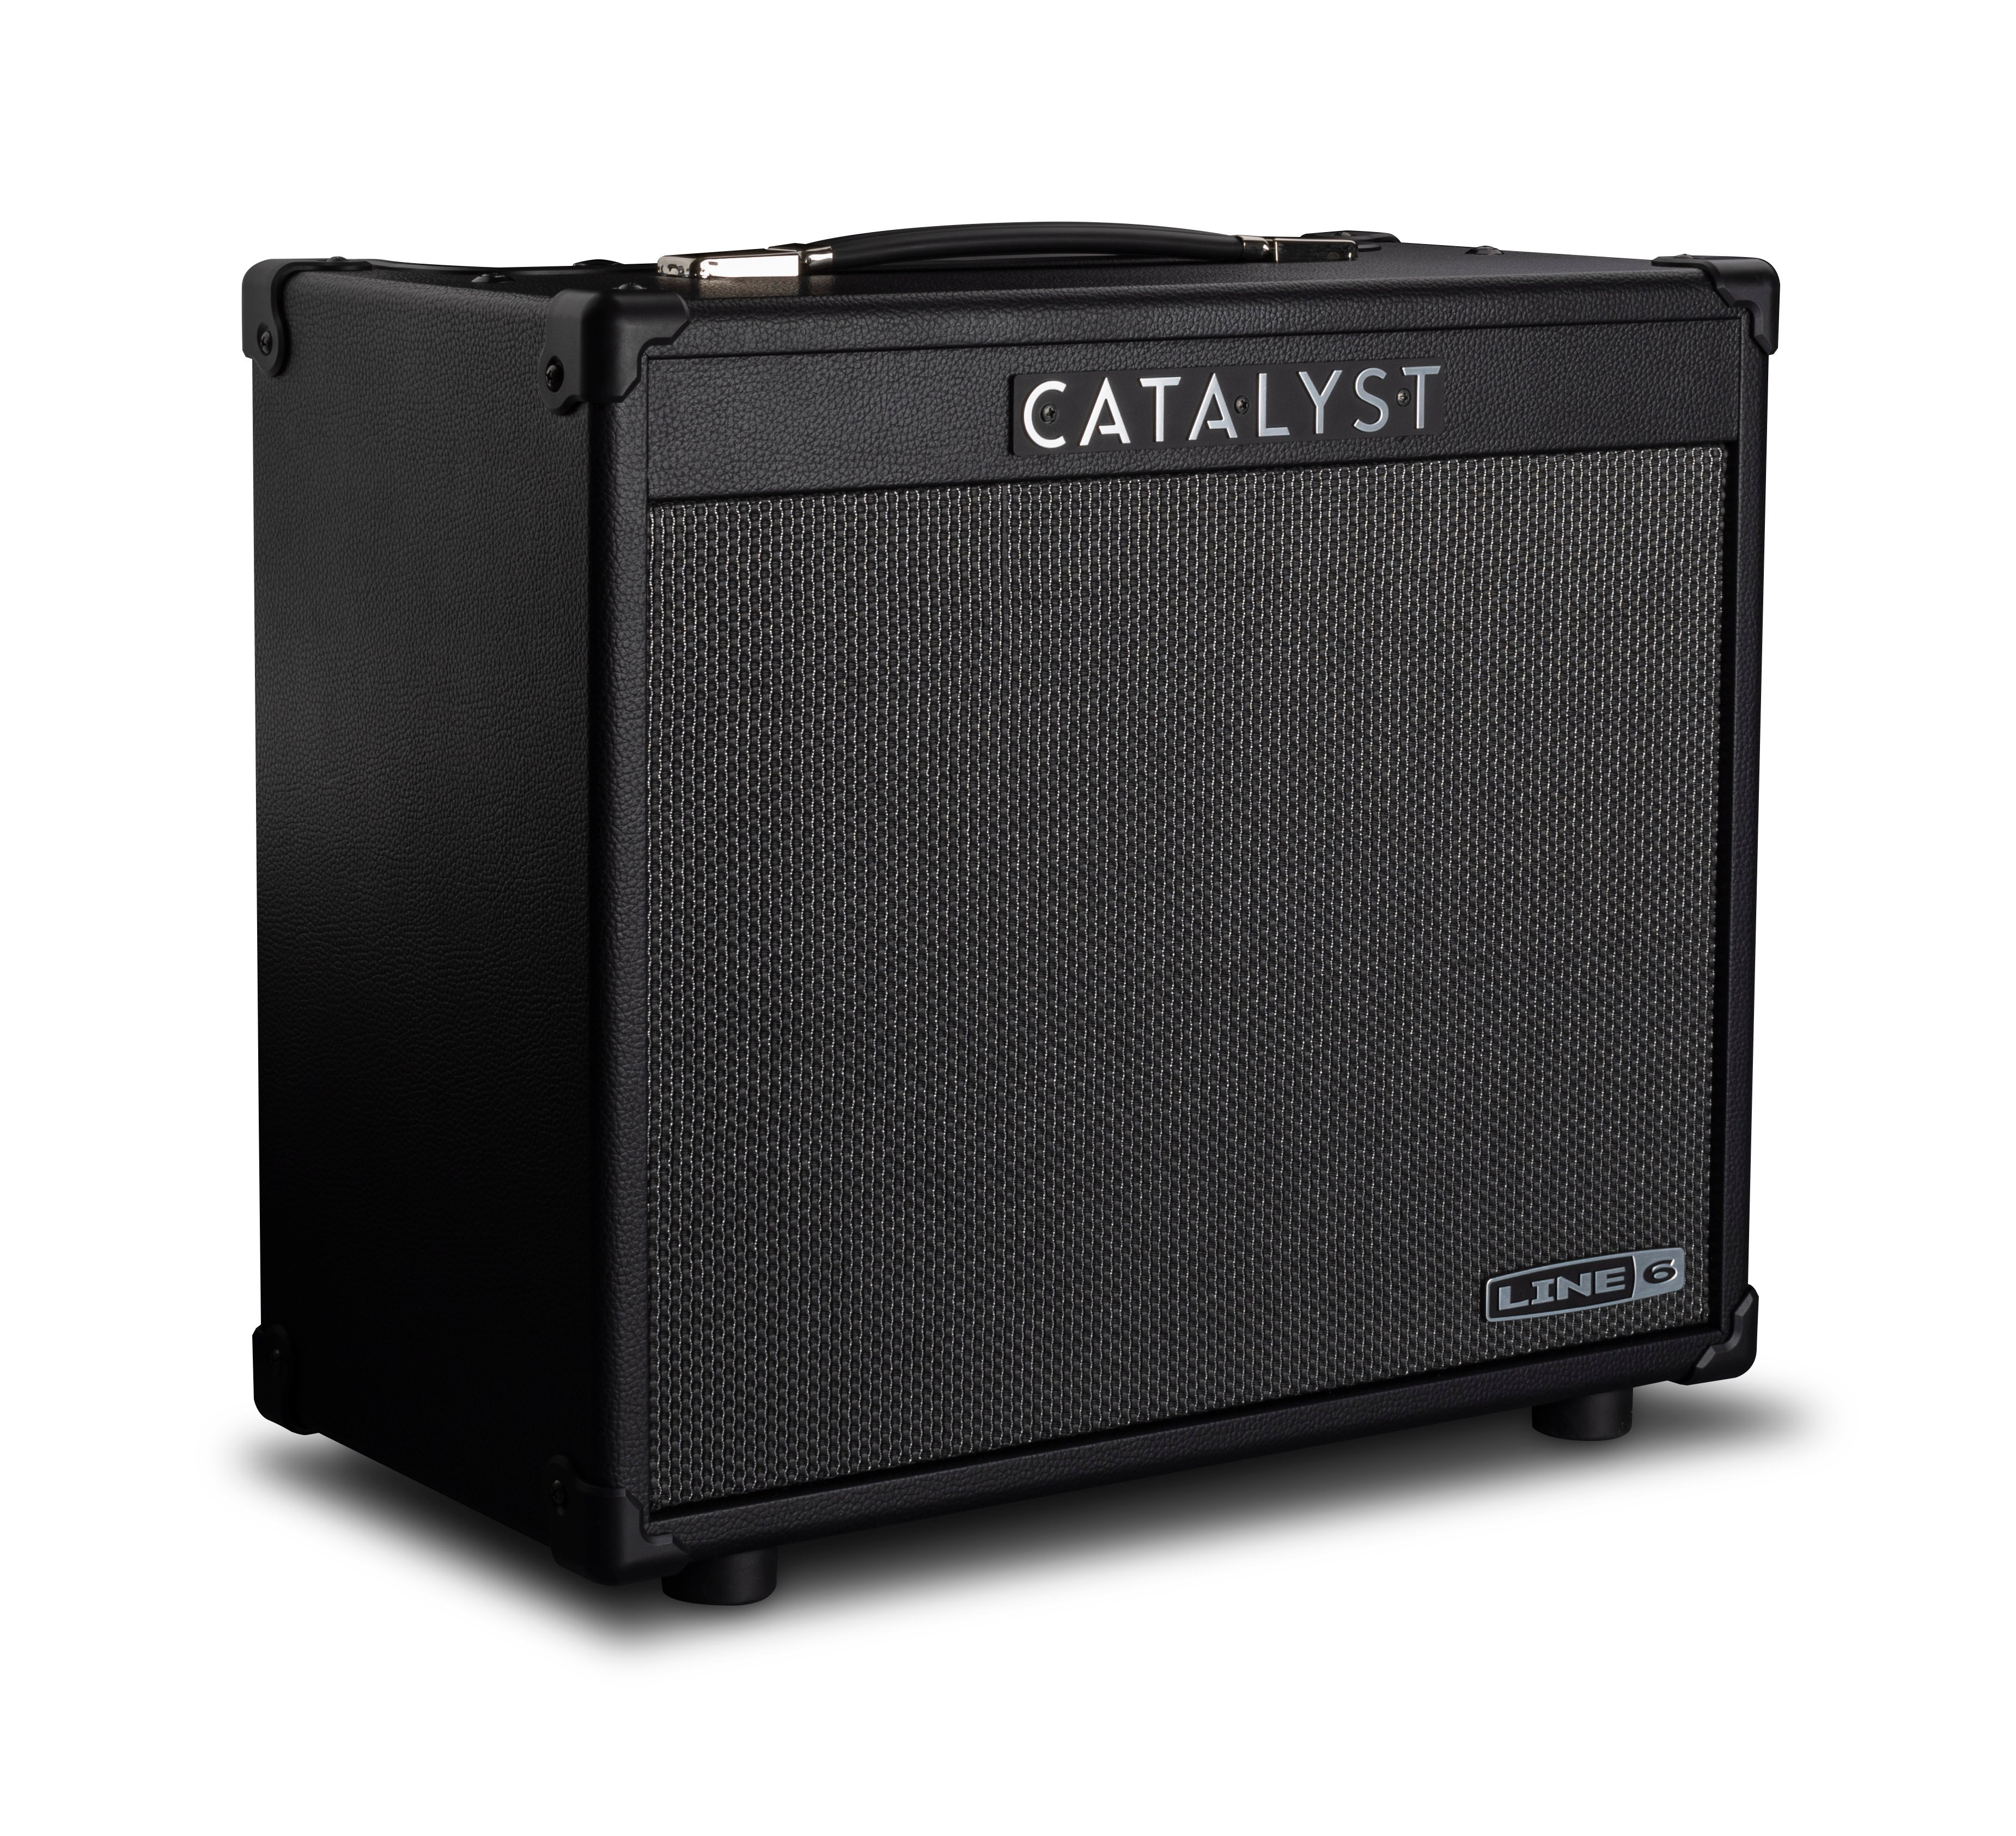 Upgrade from the original – The Catalyst